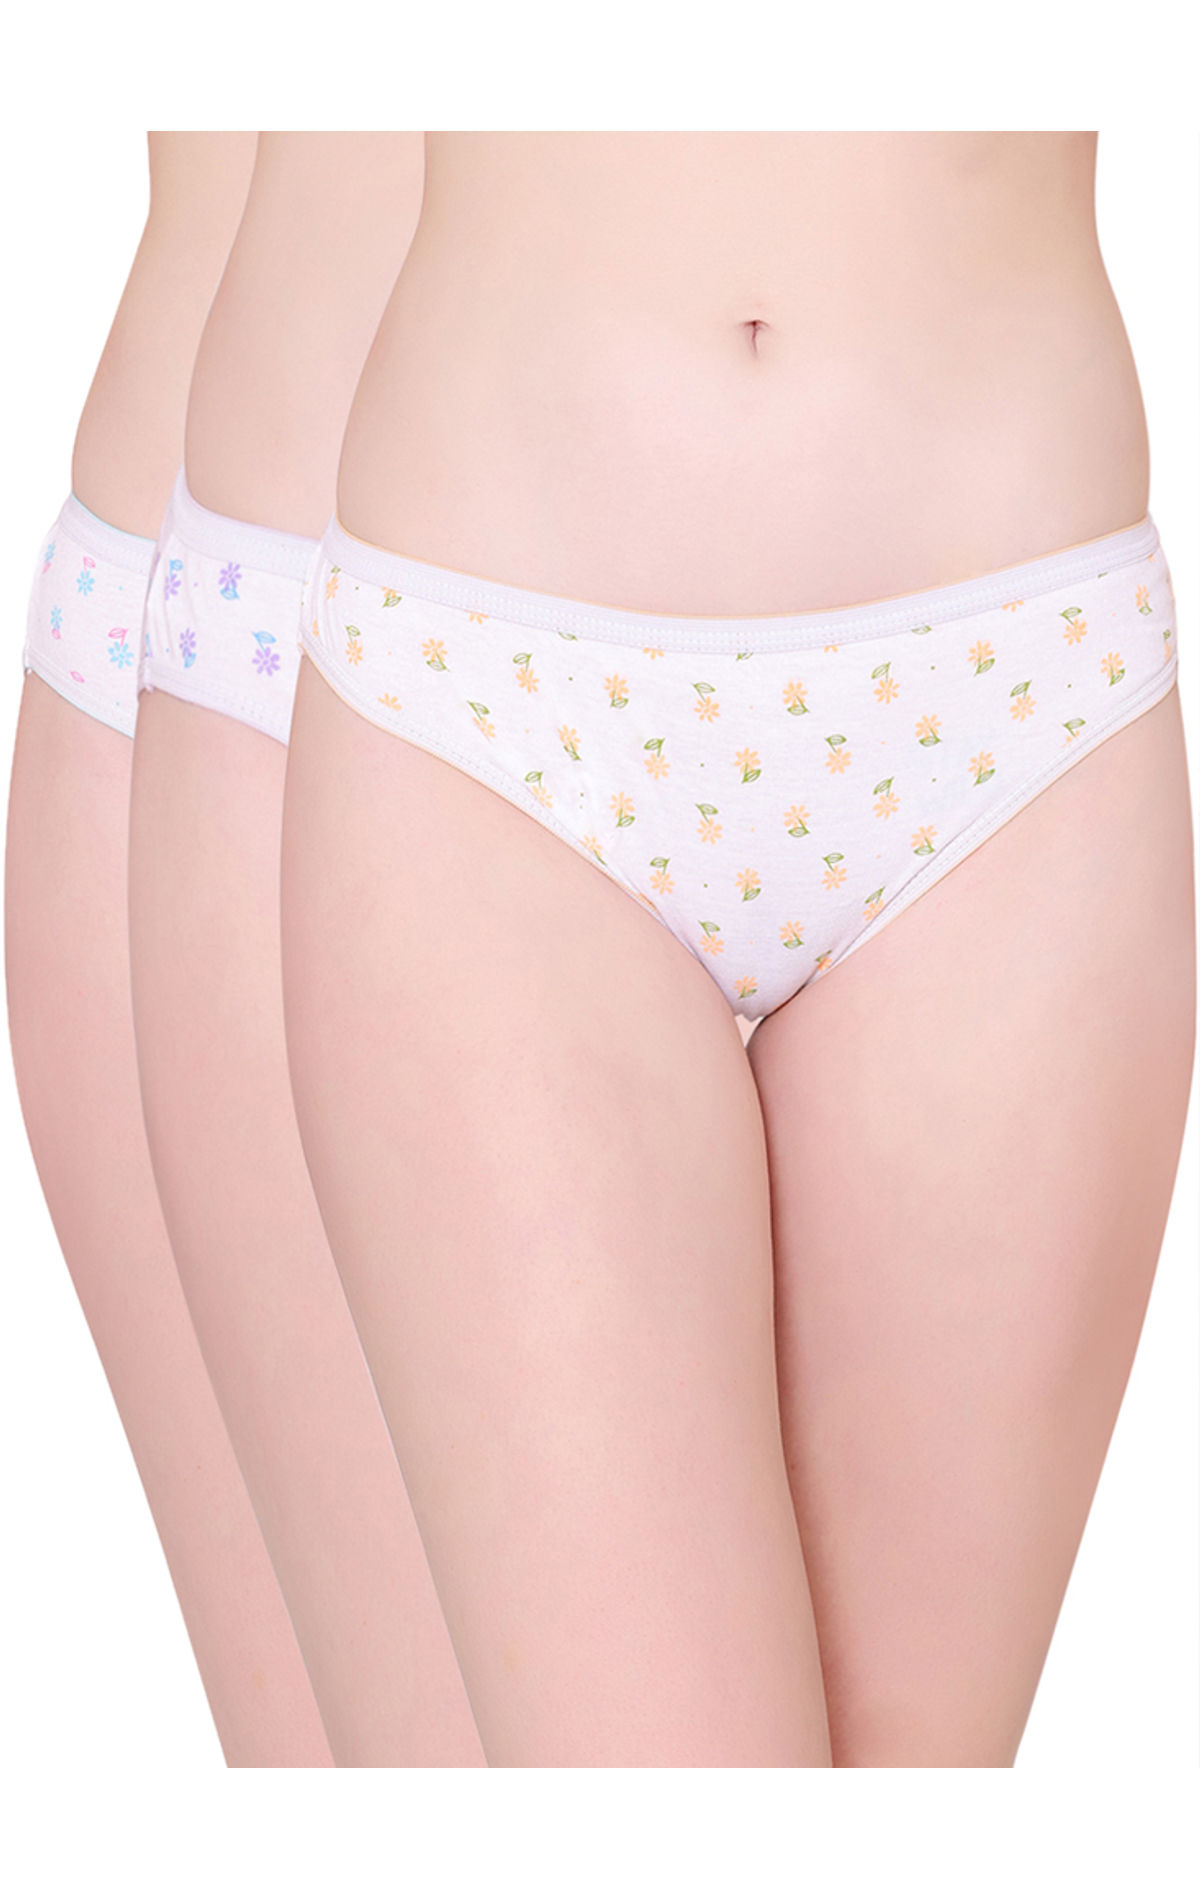 TWEENS Cotton Women Bikini Multicolor Panty - Buy Multicolor TWEENS Cotton  Women Bikini Multicolor Panty Online at Best Prices in India